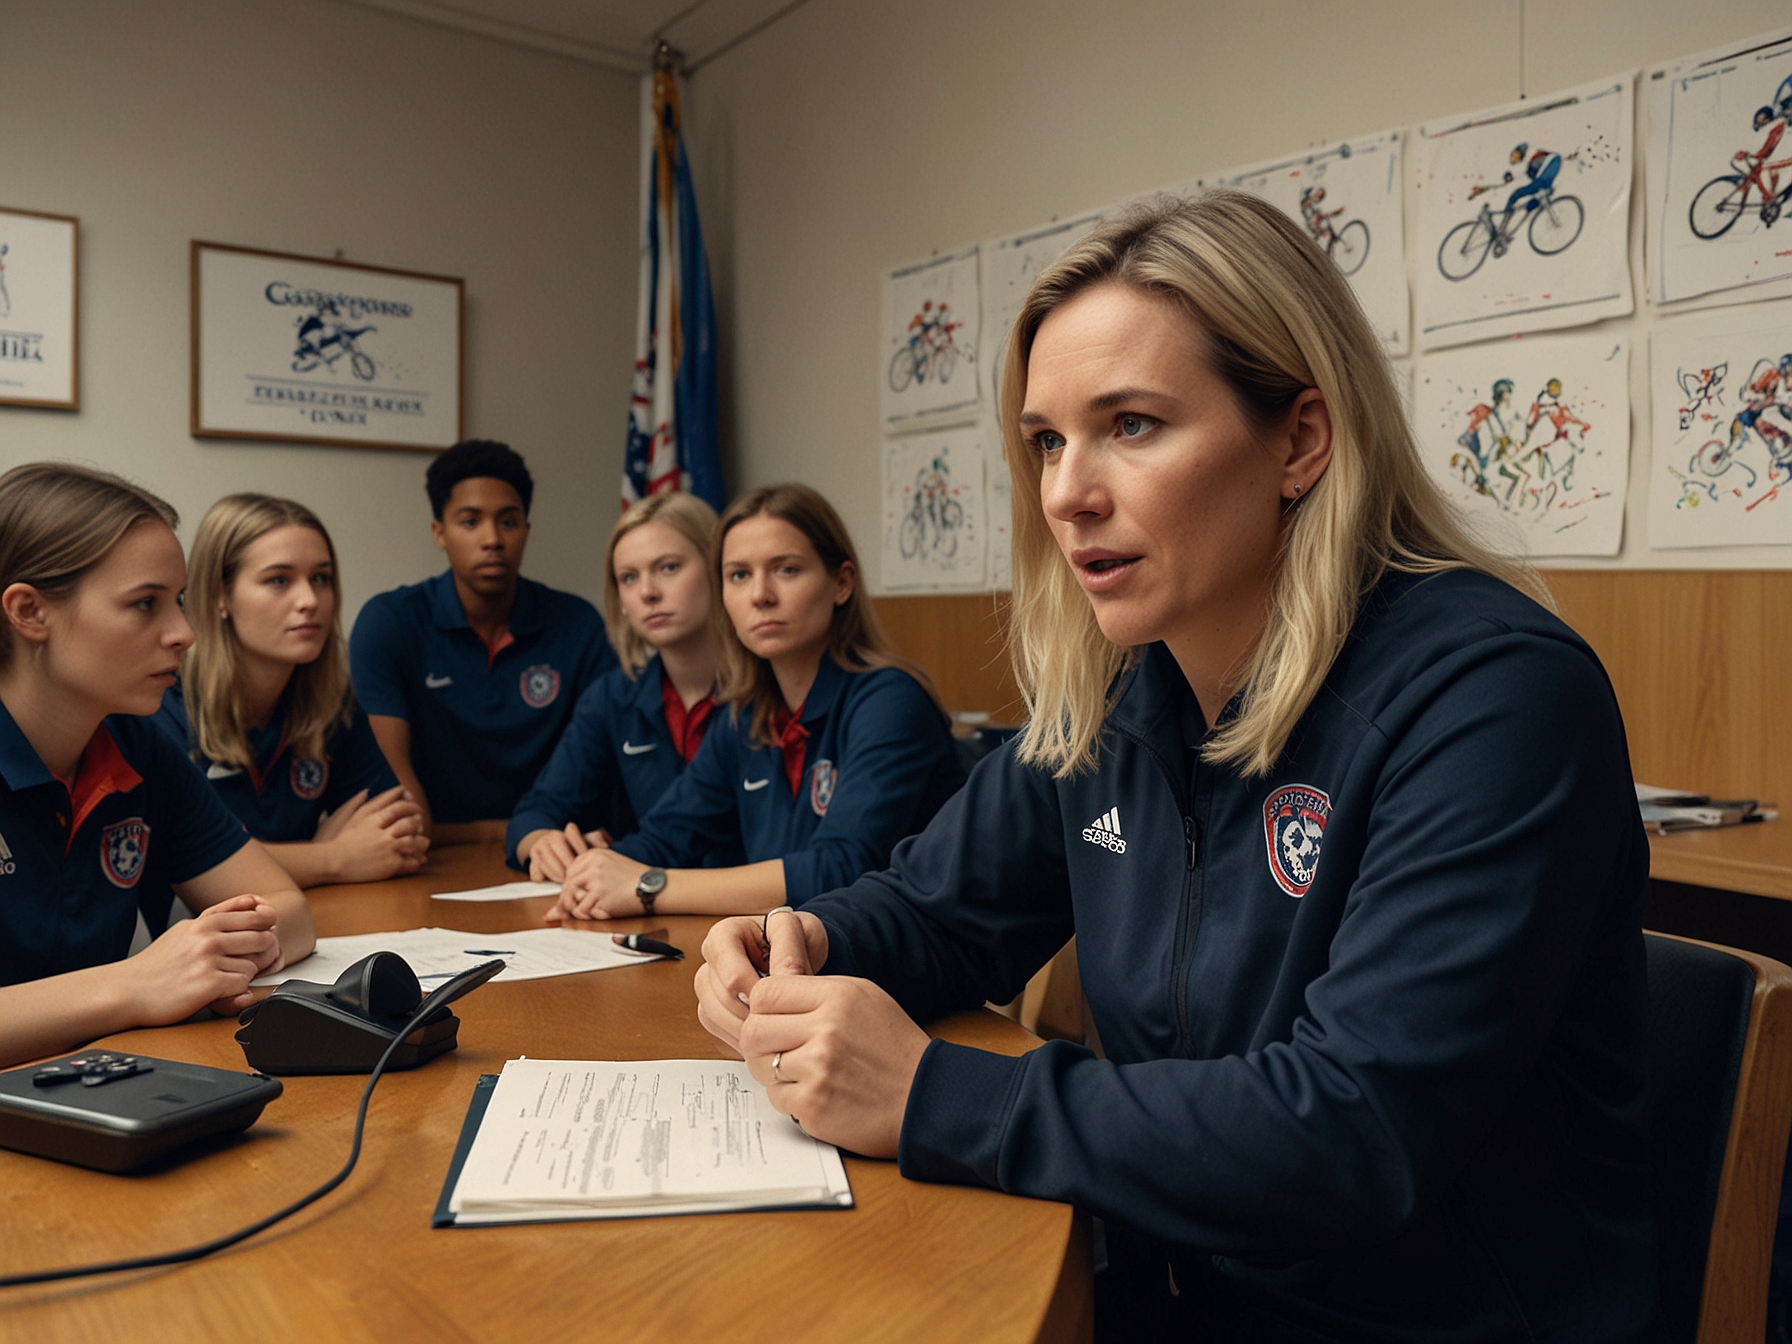 Coach Emma Hayes addressing the media, emphasizing a strategic pivot towards younger talent for the upcoming Olympics. Her decision to exclude Morgan marks a significant change in team composition.